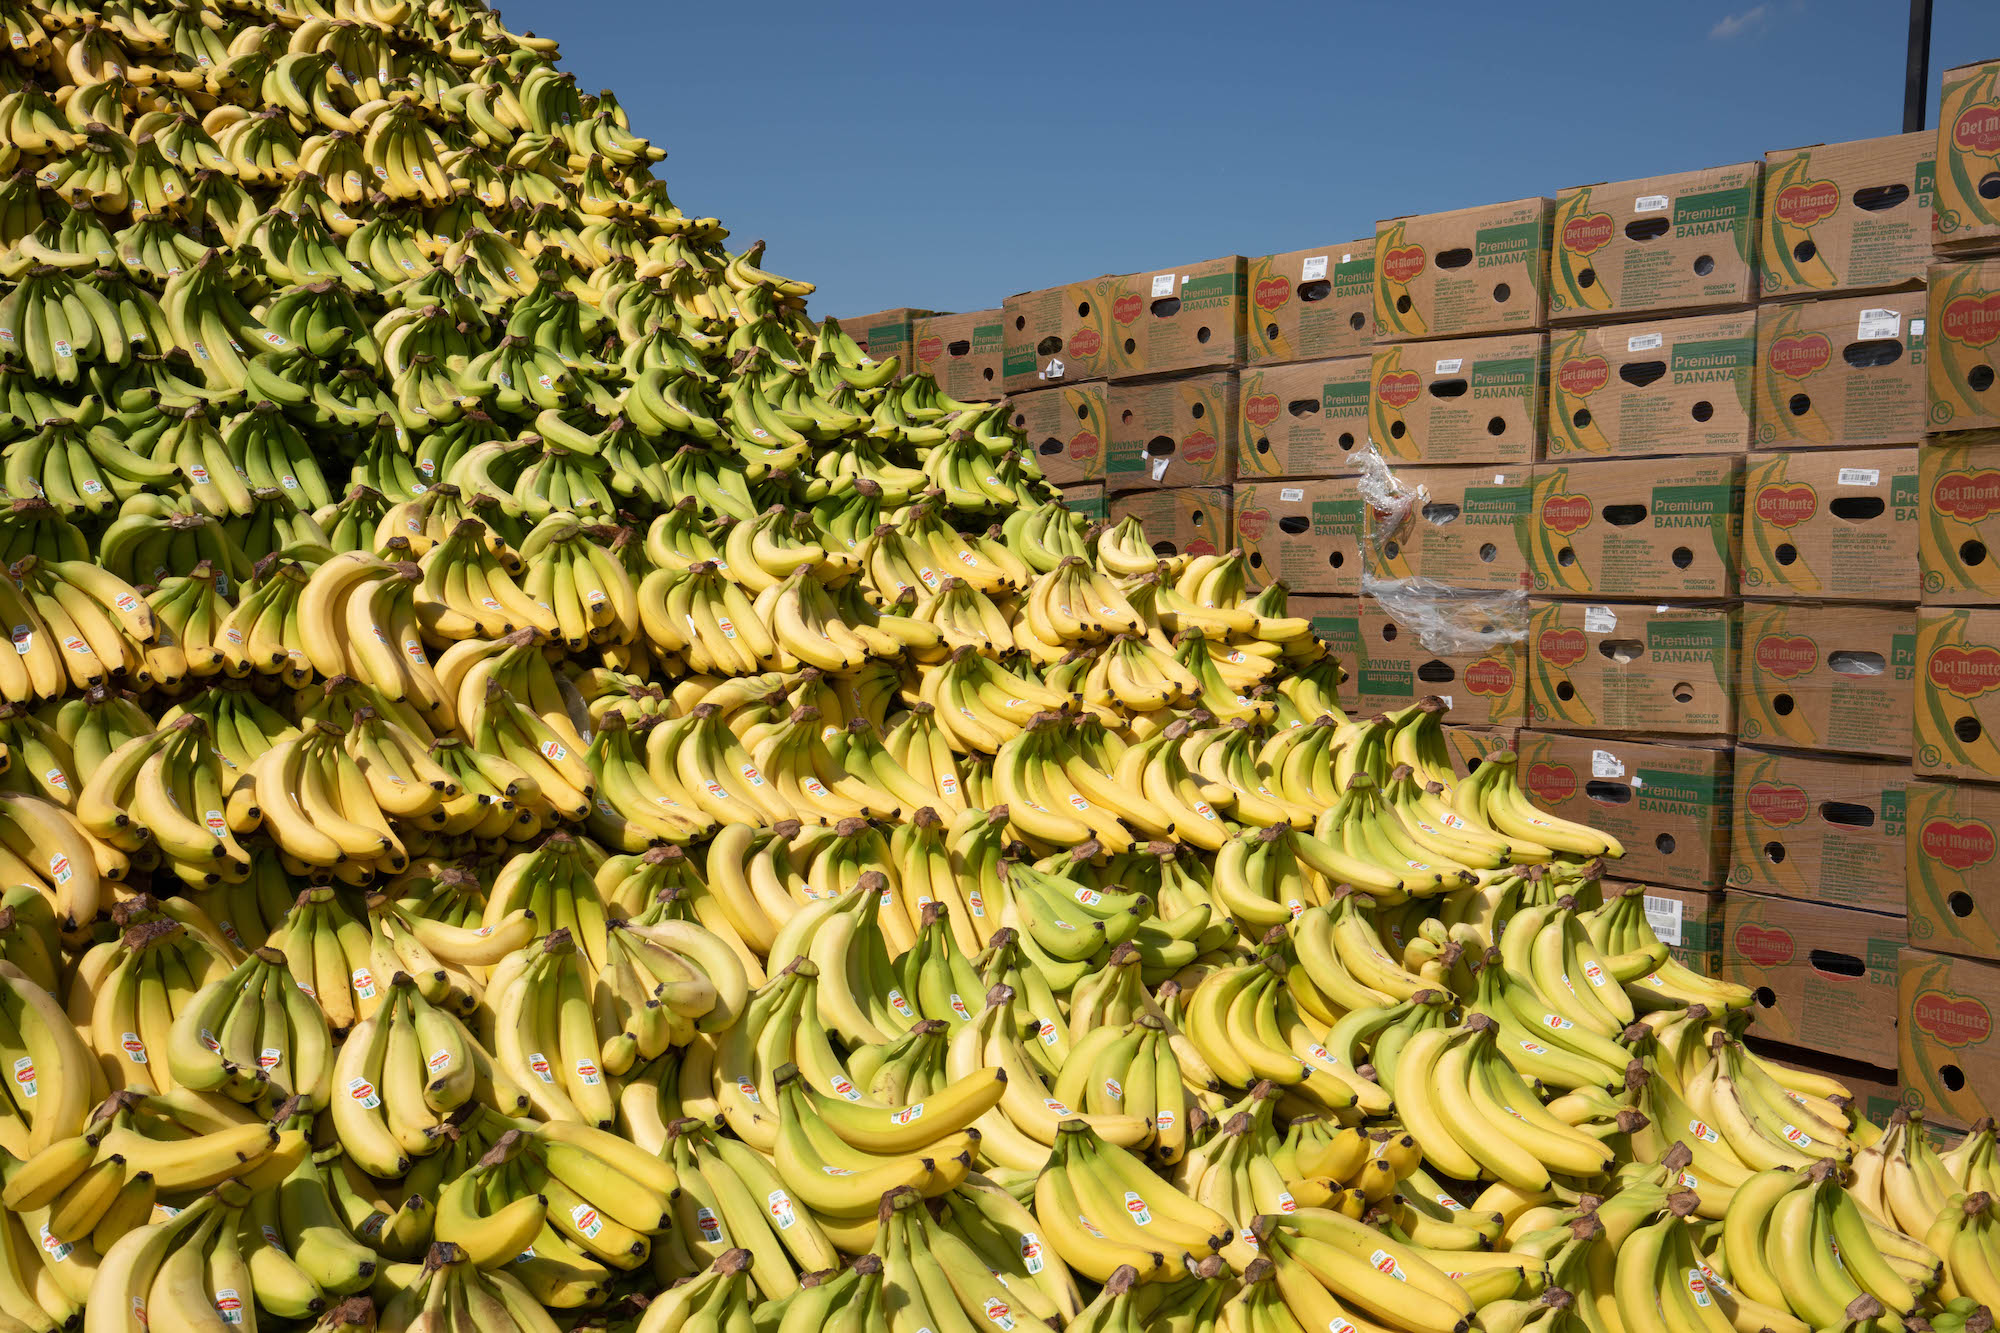   Together, a fresh produce supplier and retailer broke a world record: World’s Largest Fruit Display.